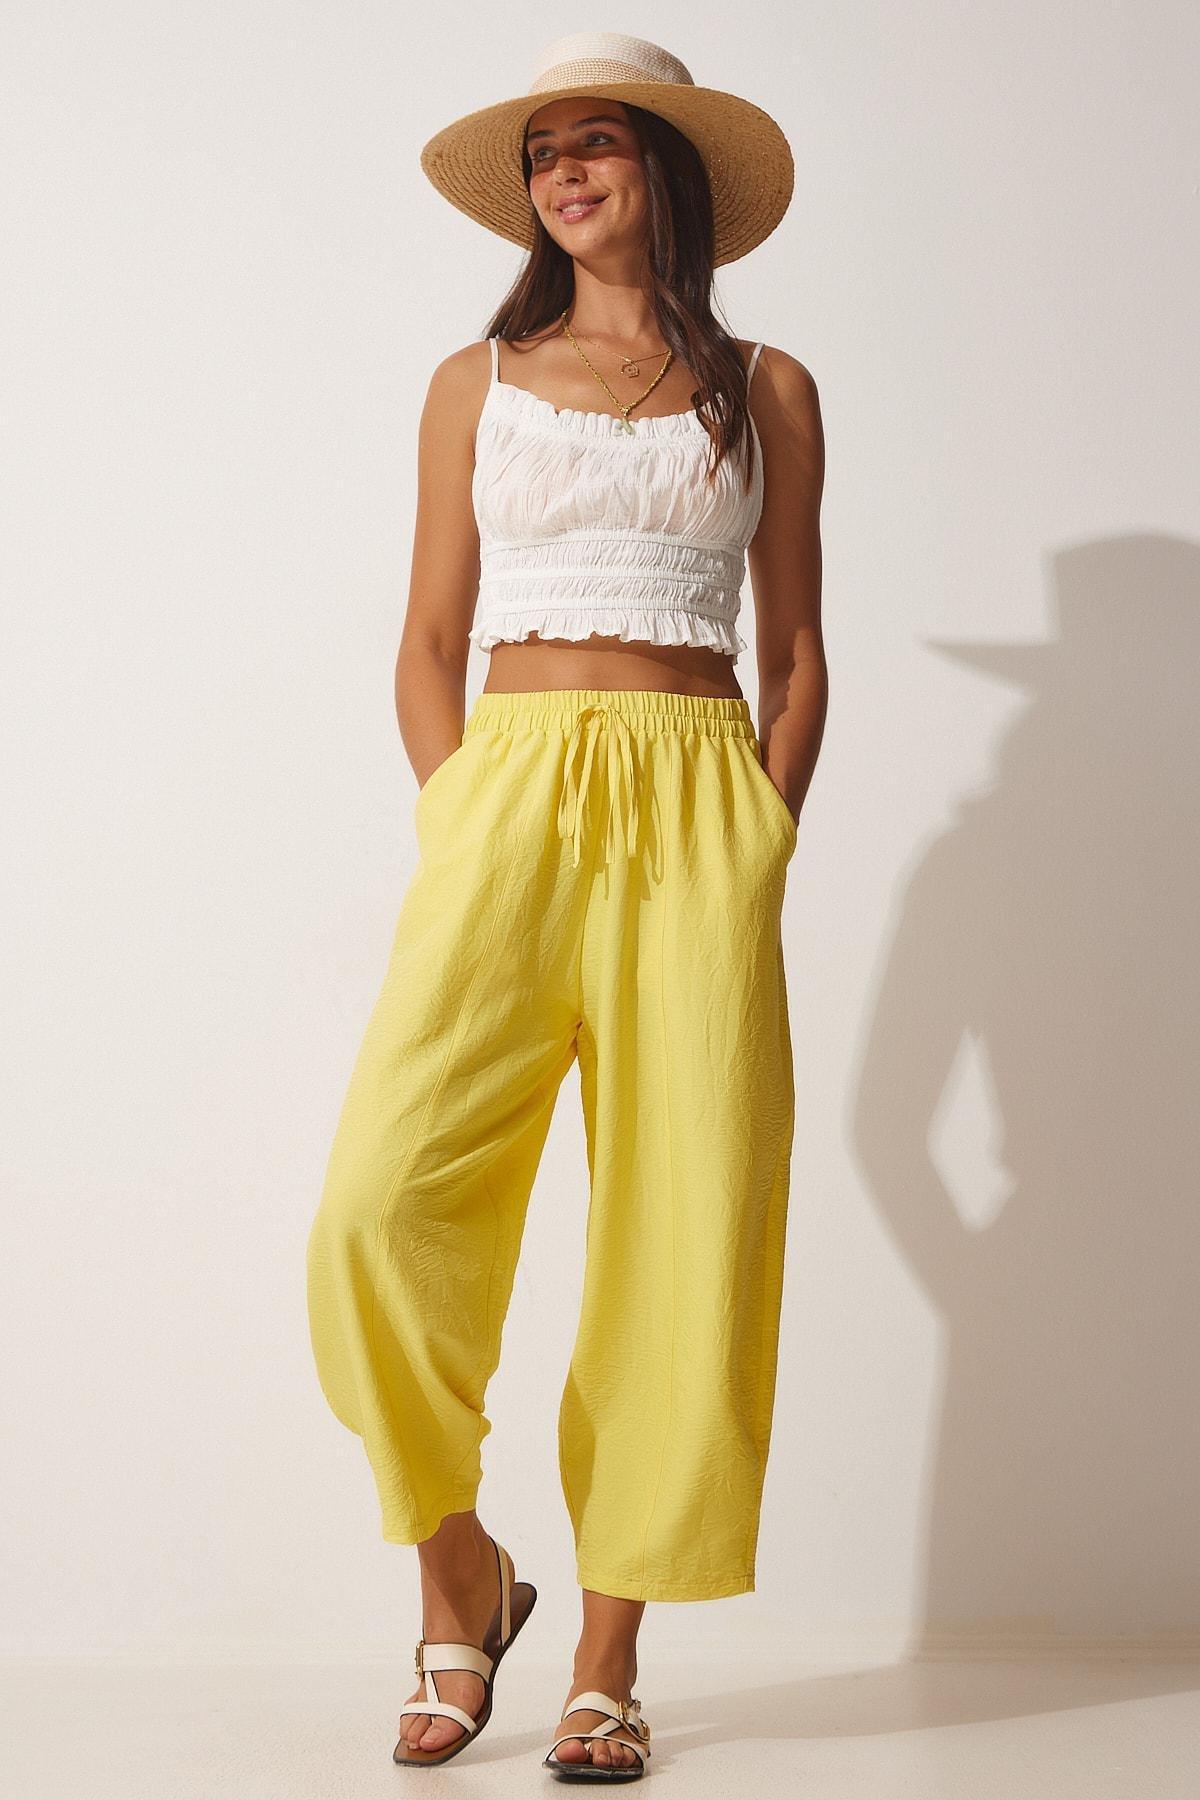 Happiness Istanbul - Yellow Pocket Sweater Baggy Pants